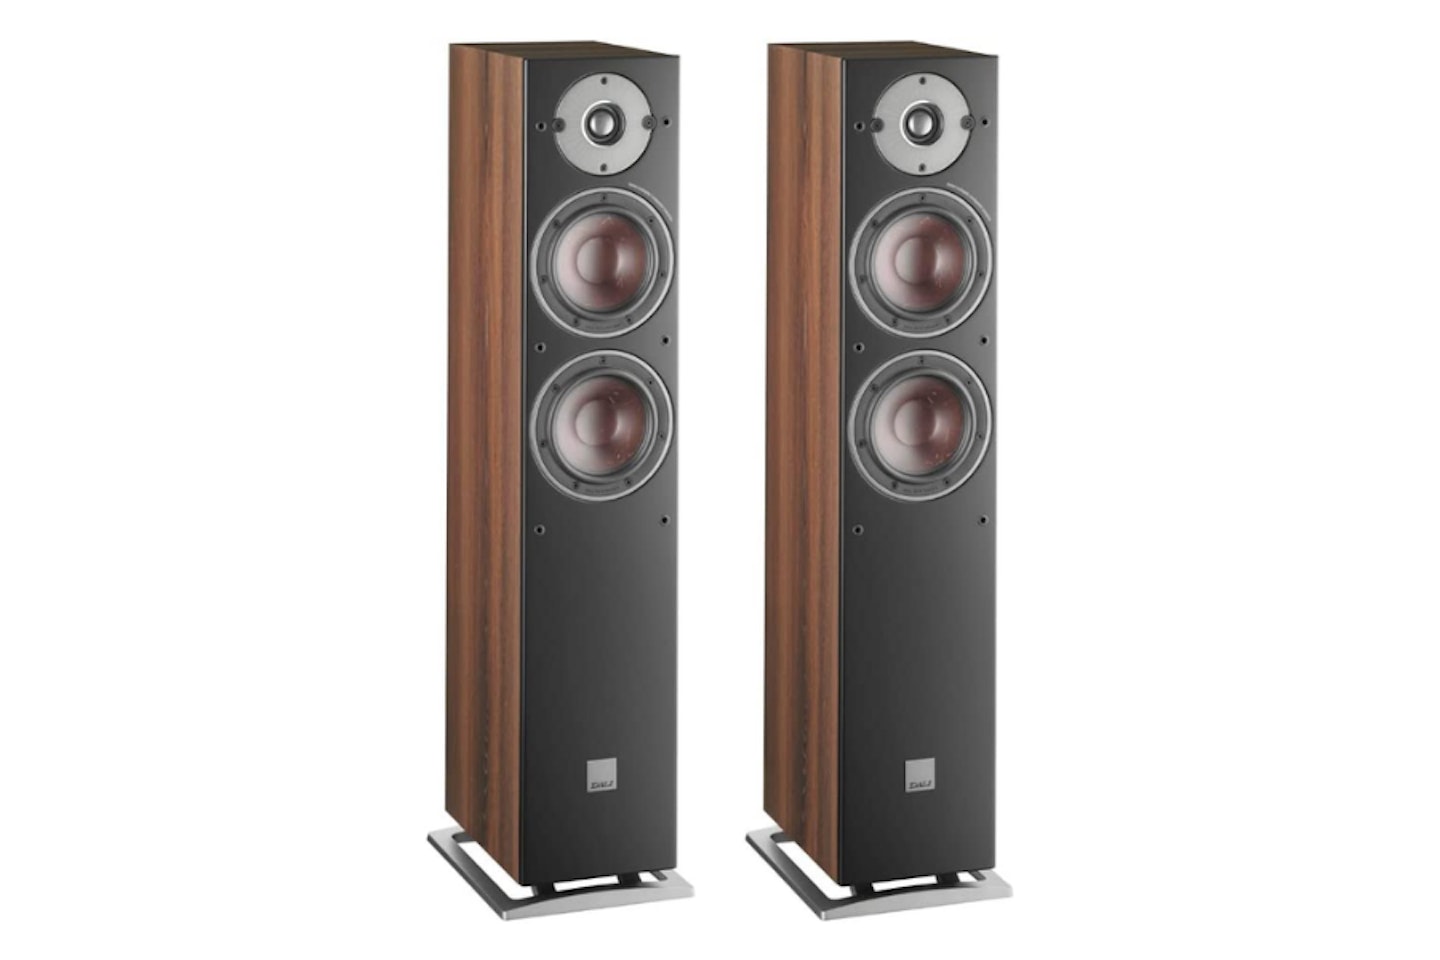 DALI Oberon 5 Floorstanding Speakers - one of the best speakers for music